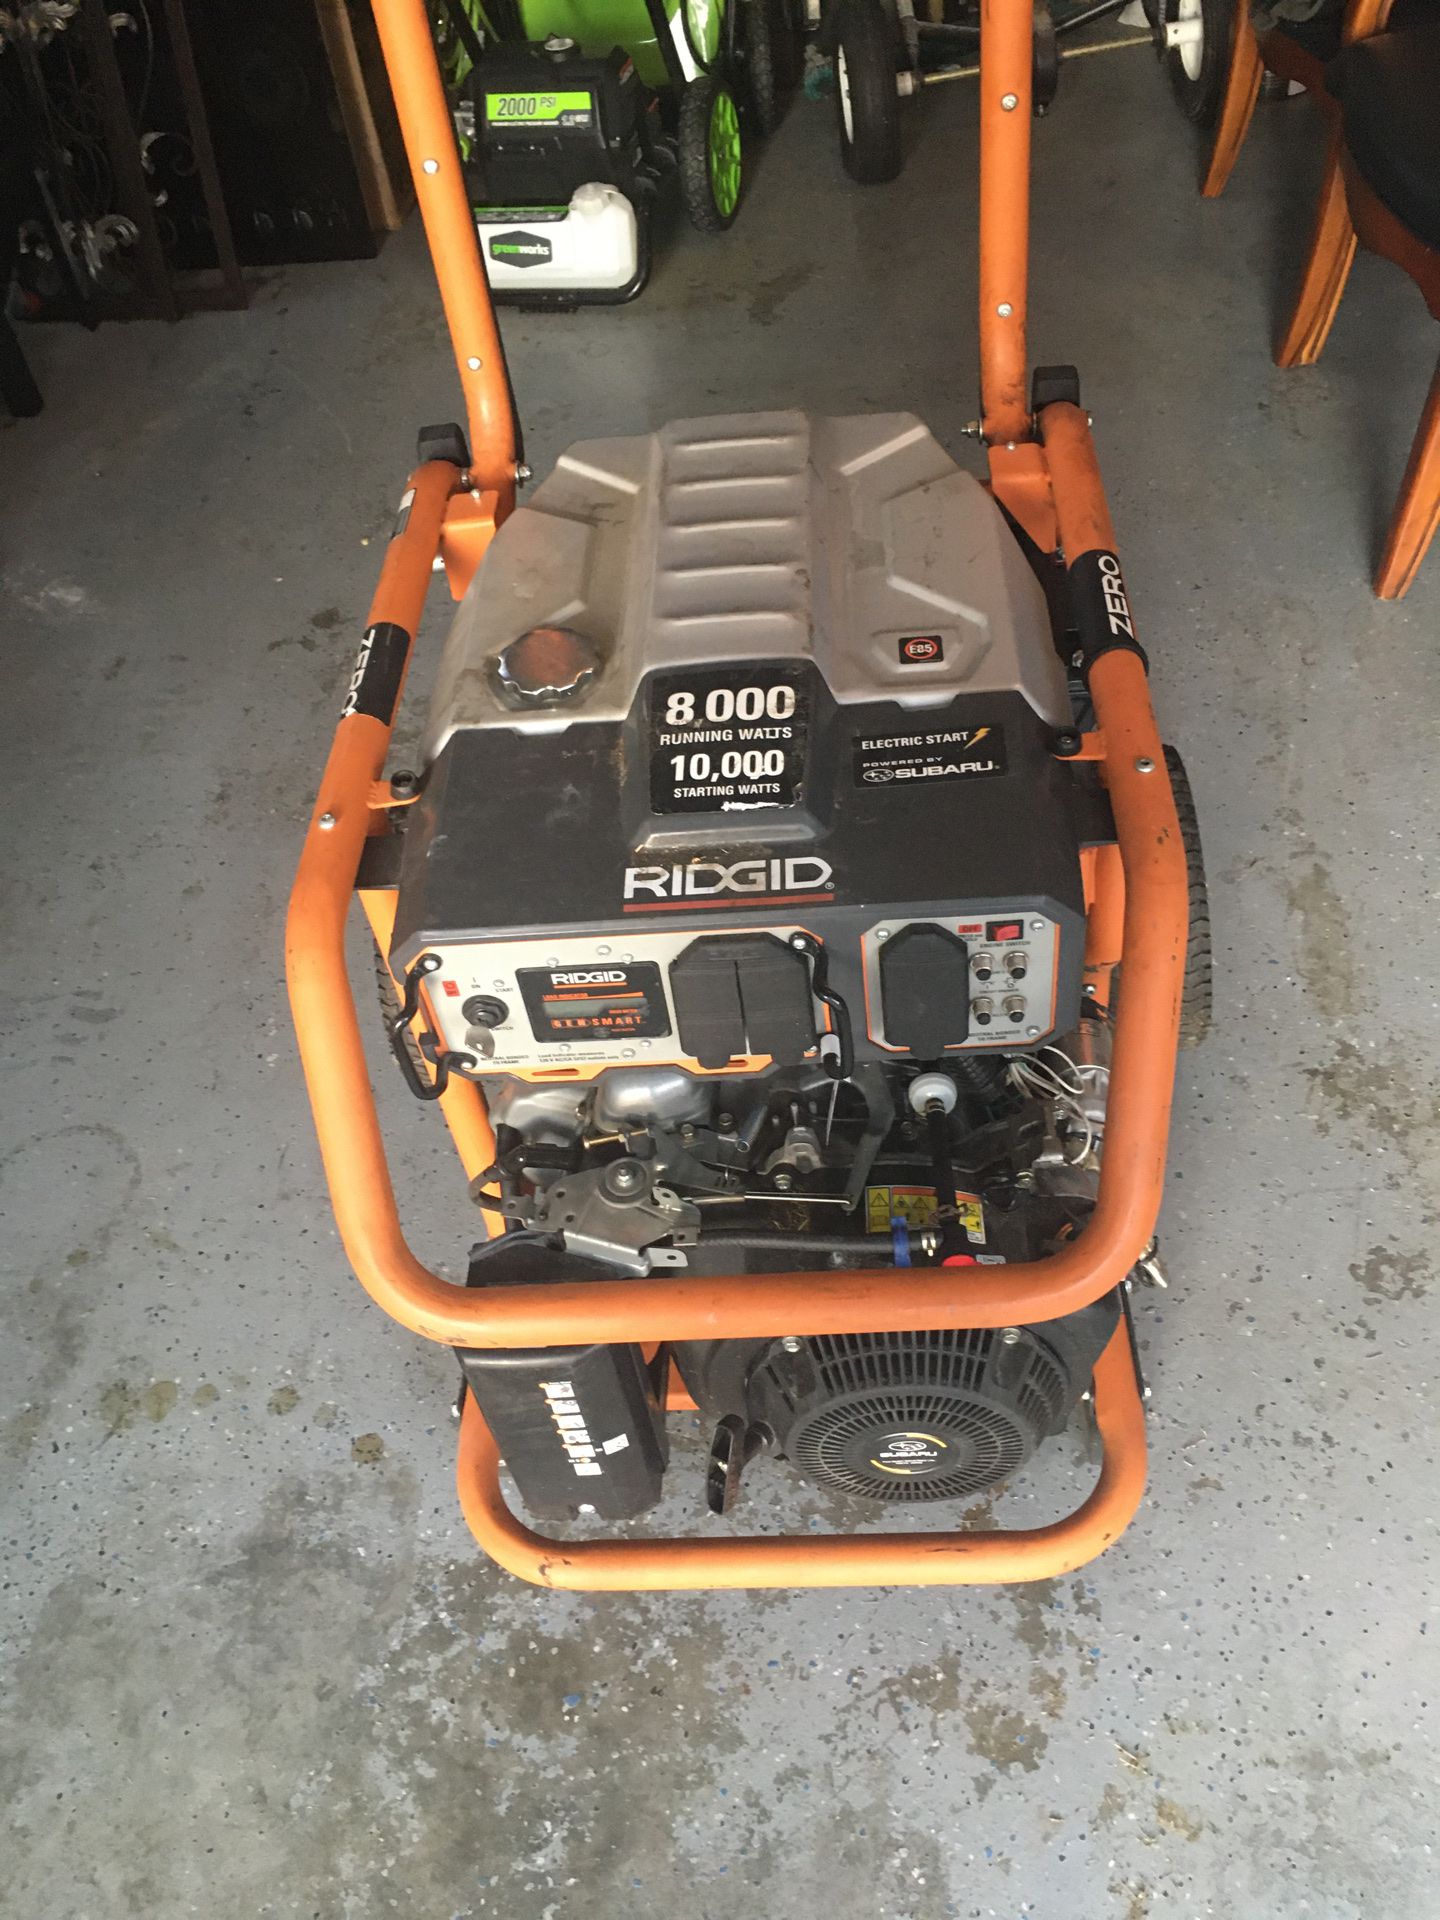 Ridgid 8000 W generatorWith 10,000 W cranking amps. 240 hours, original owner, in very good working condition.Price reduced from 750 to 550